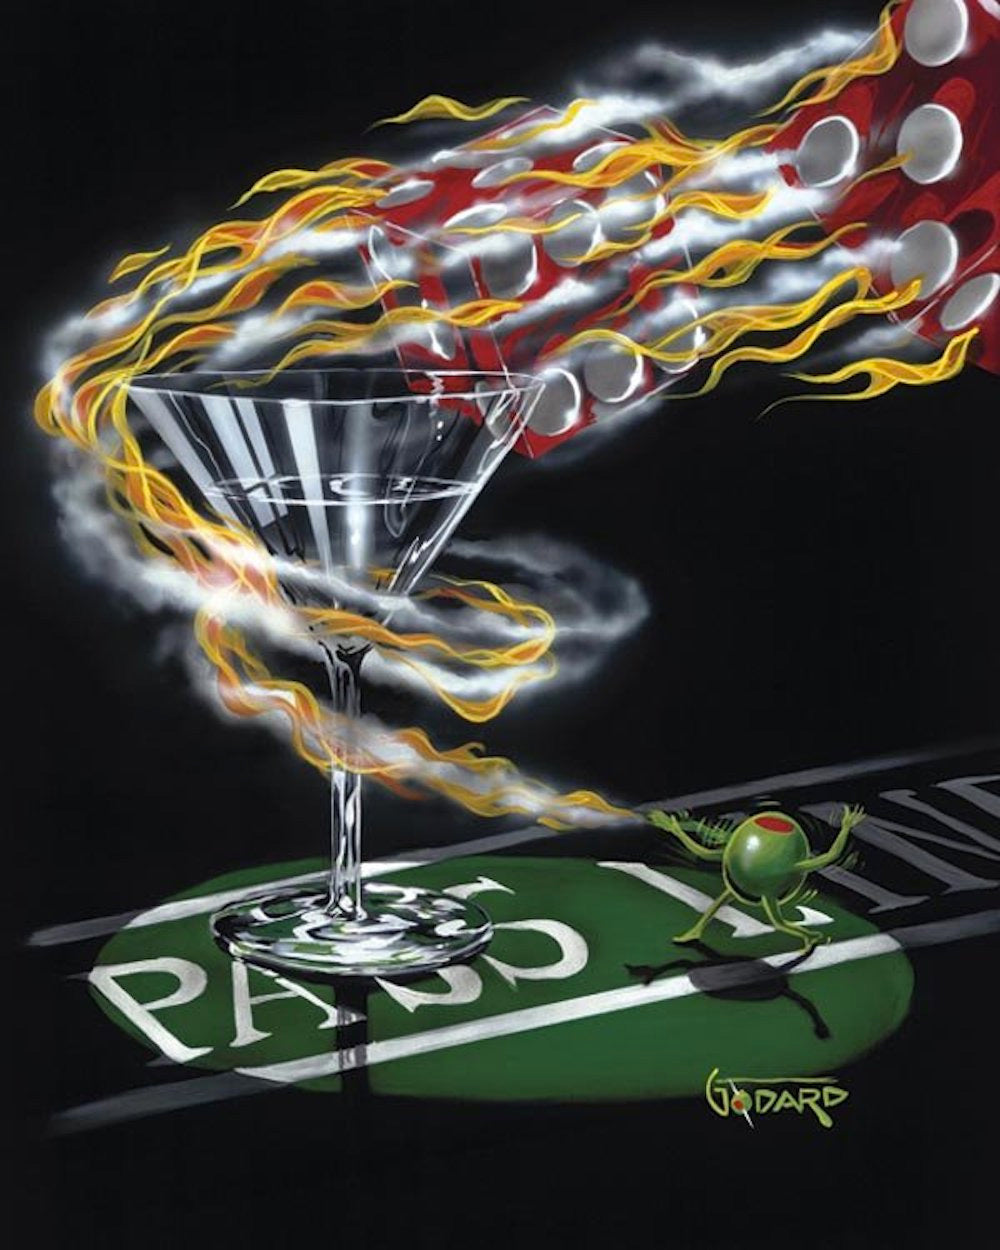 Michael Godard "Burning It Up" Limited Edition Canvas Giclee